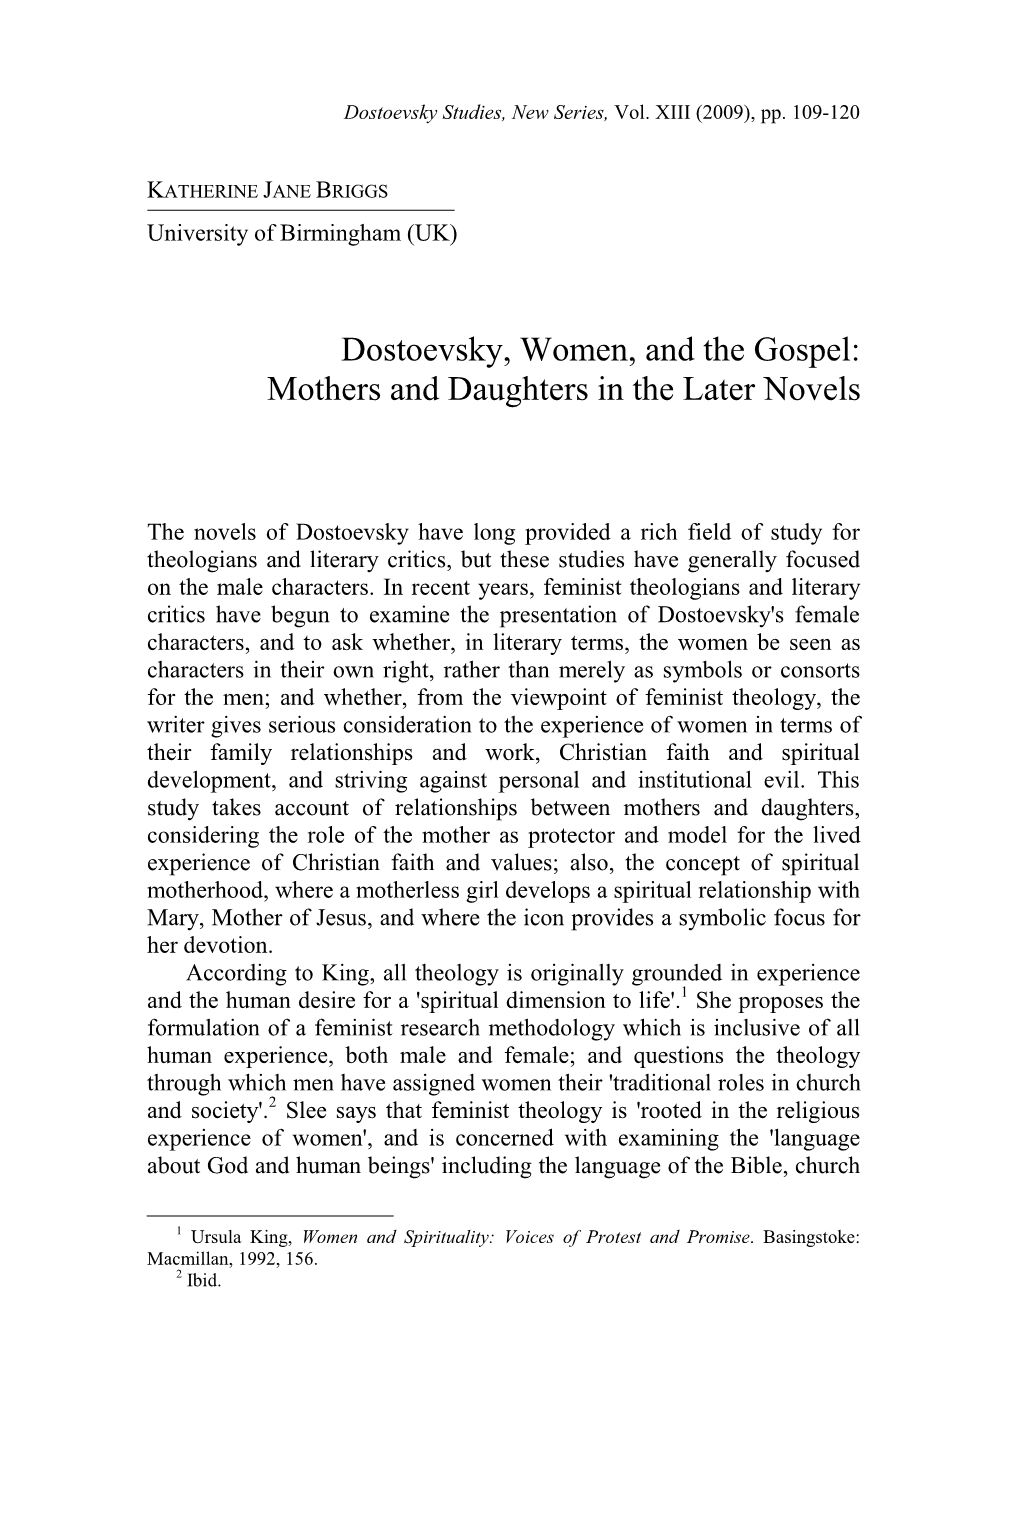 Dostoevsky, Women, and the Gospel: Mothers and Daughters in the Later Novels